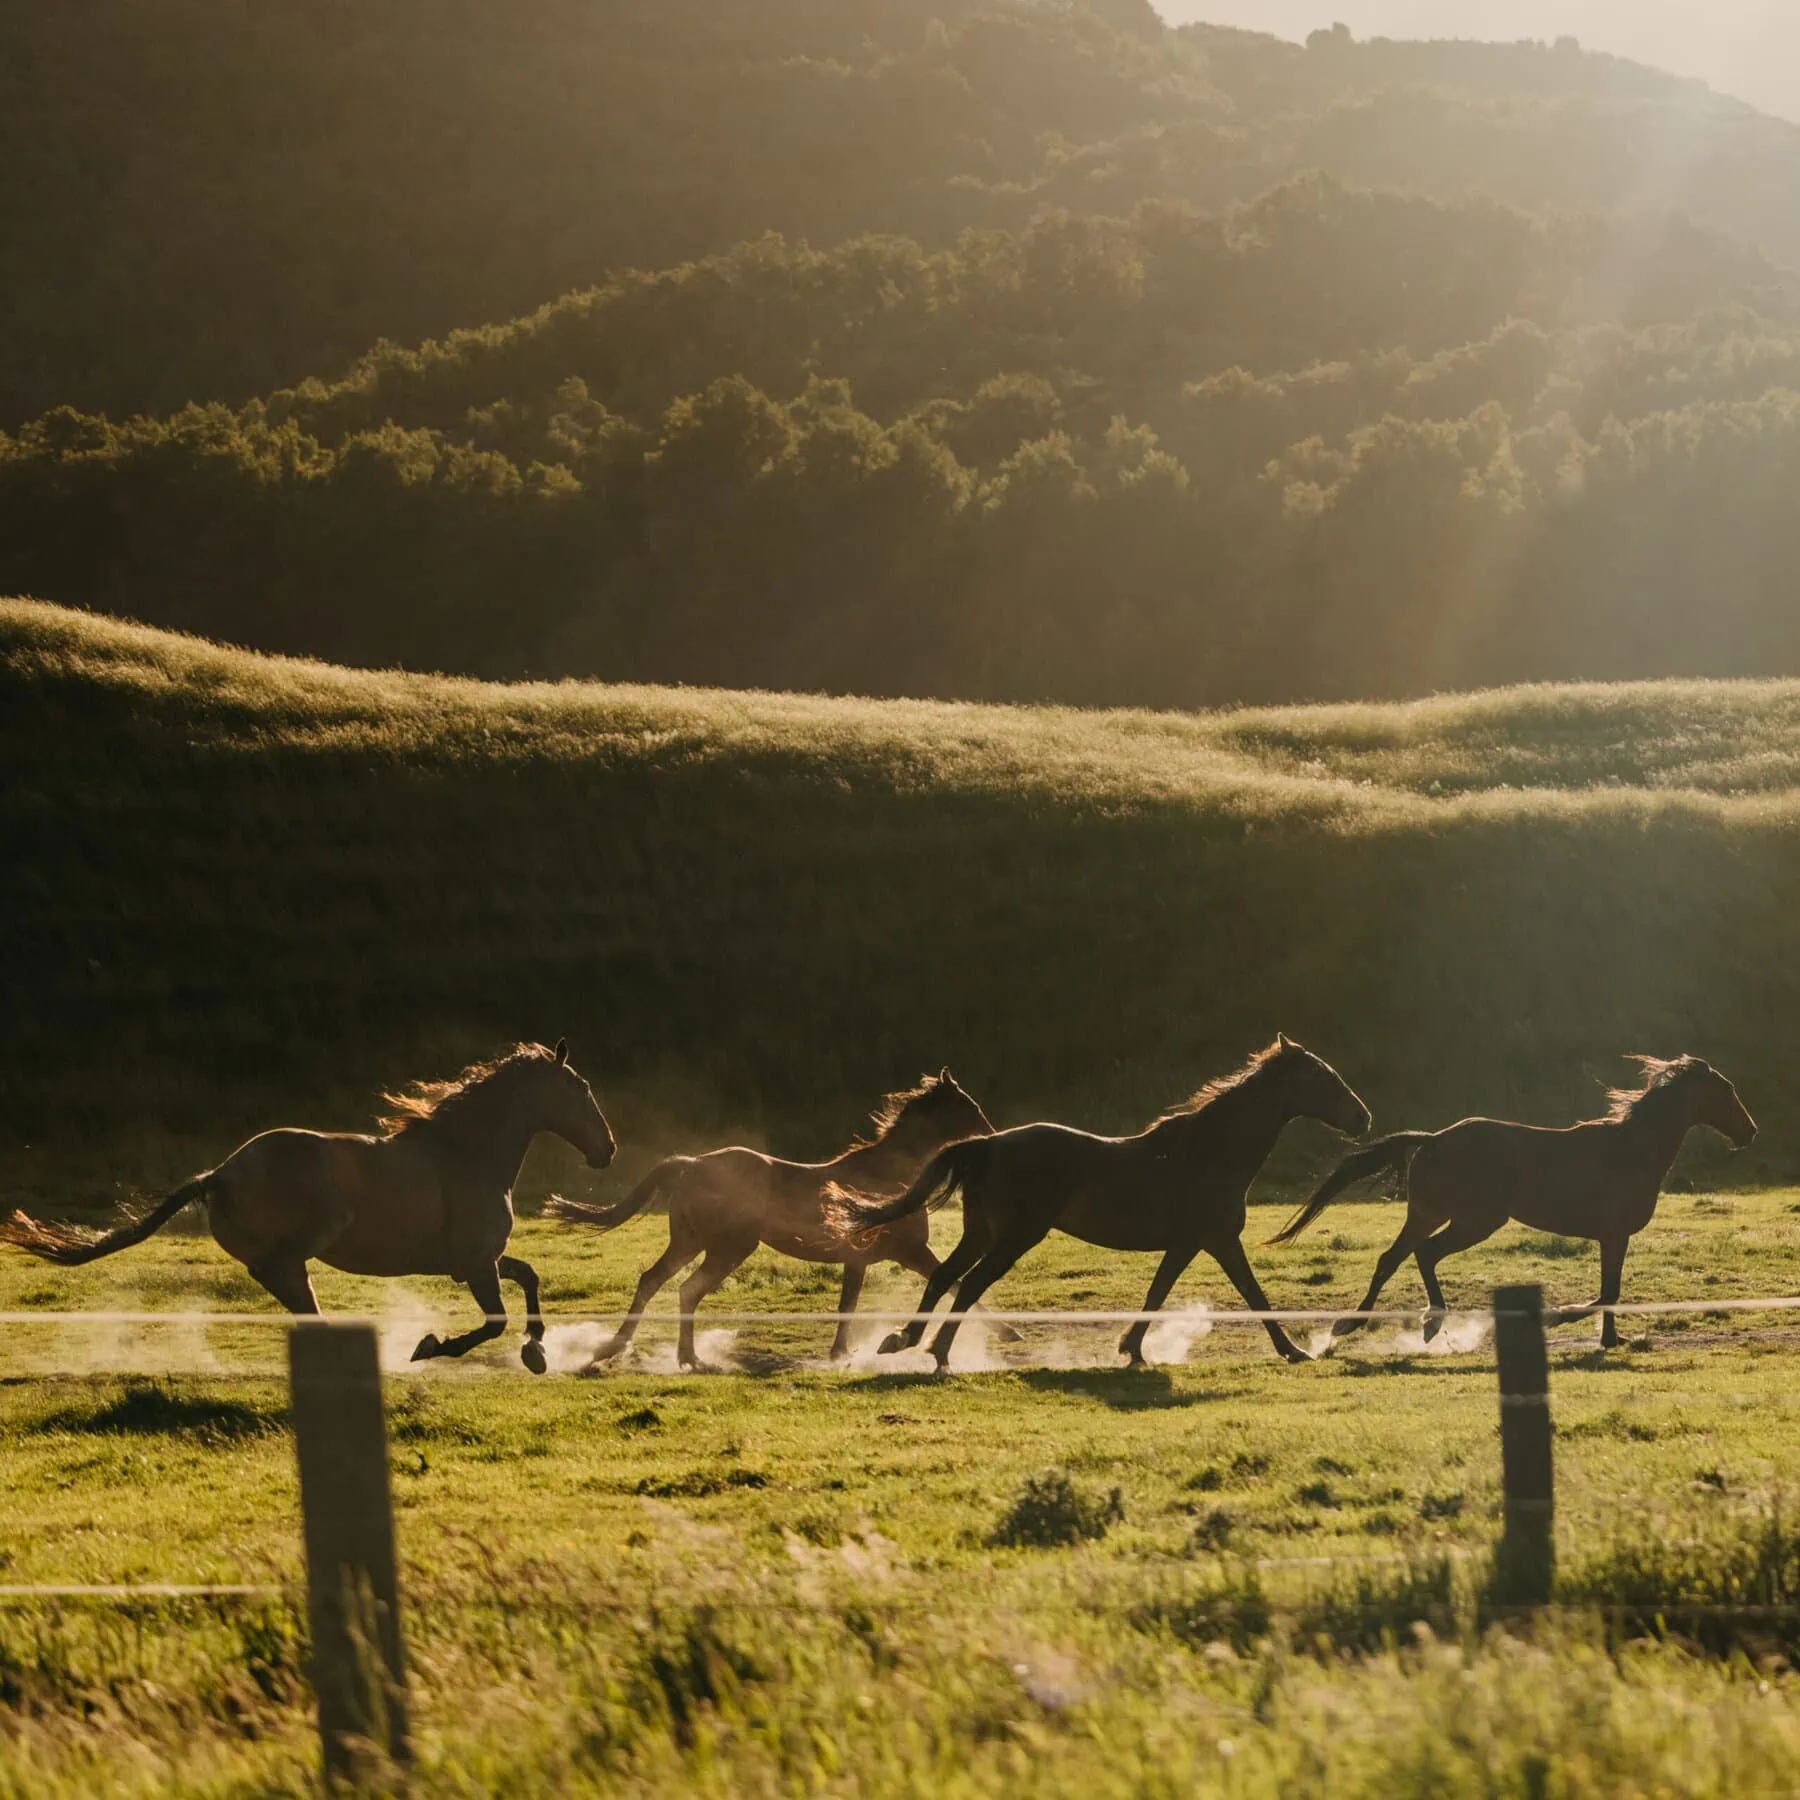 Horses running through a field in New Zealand at sunset.